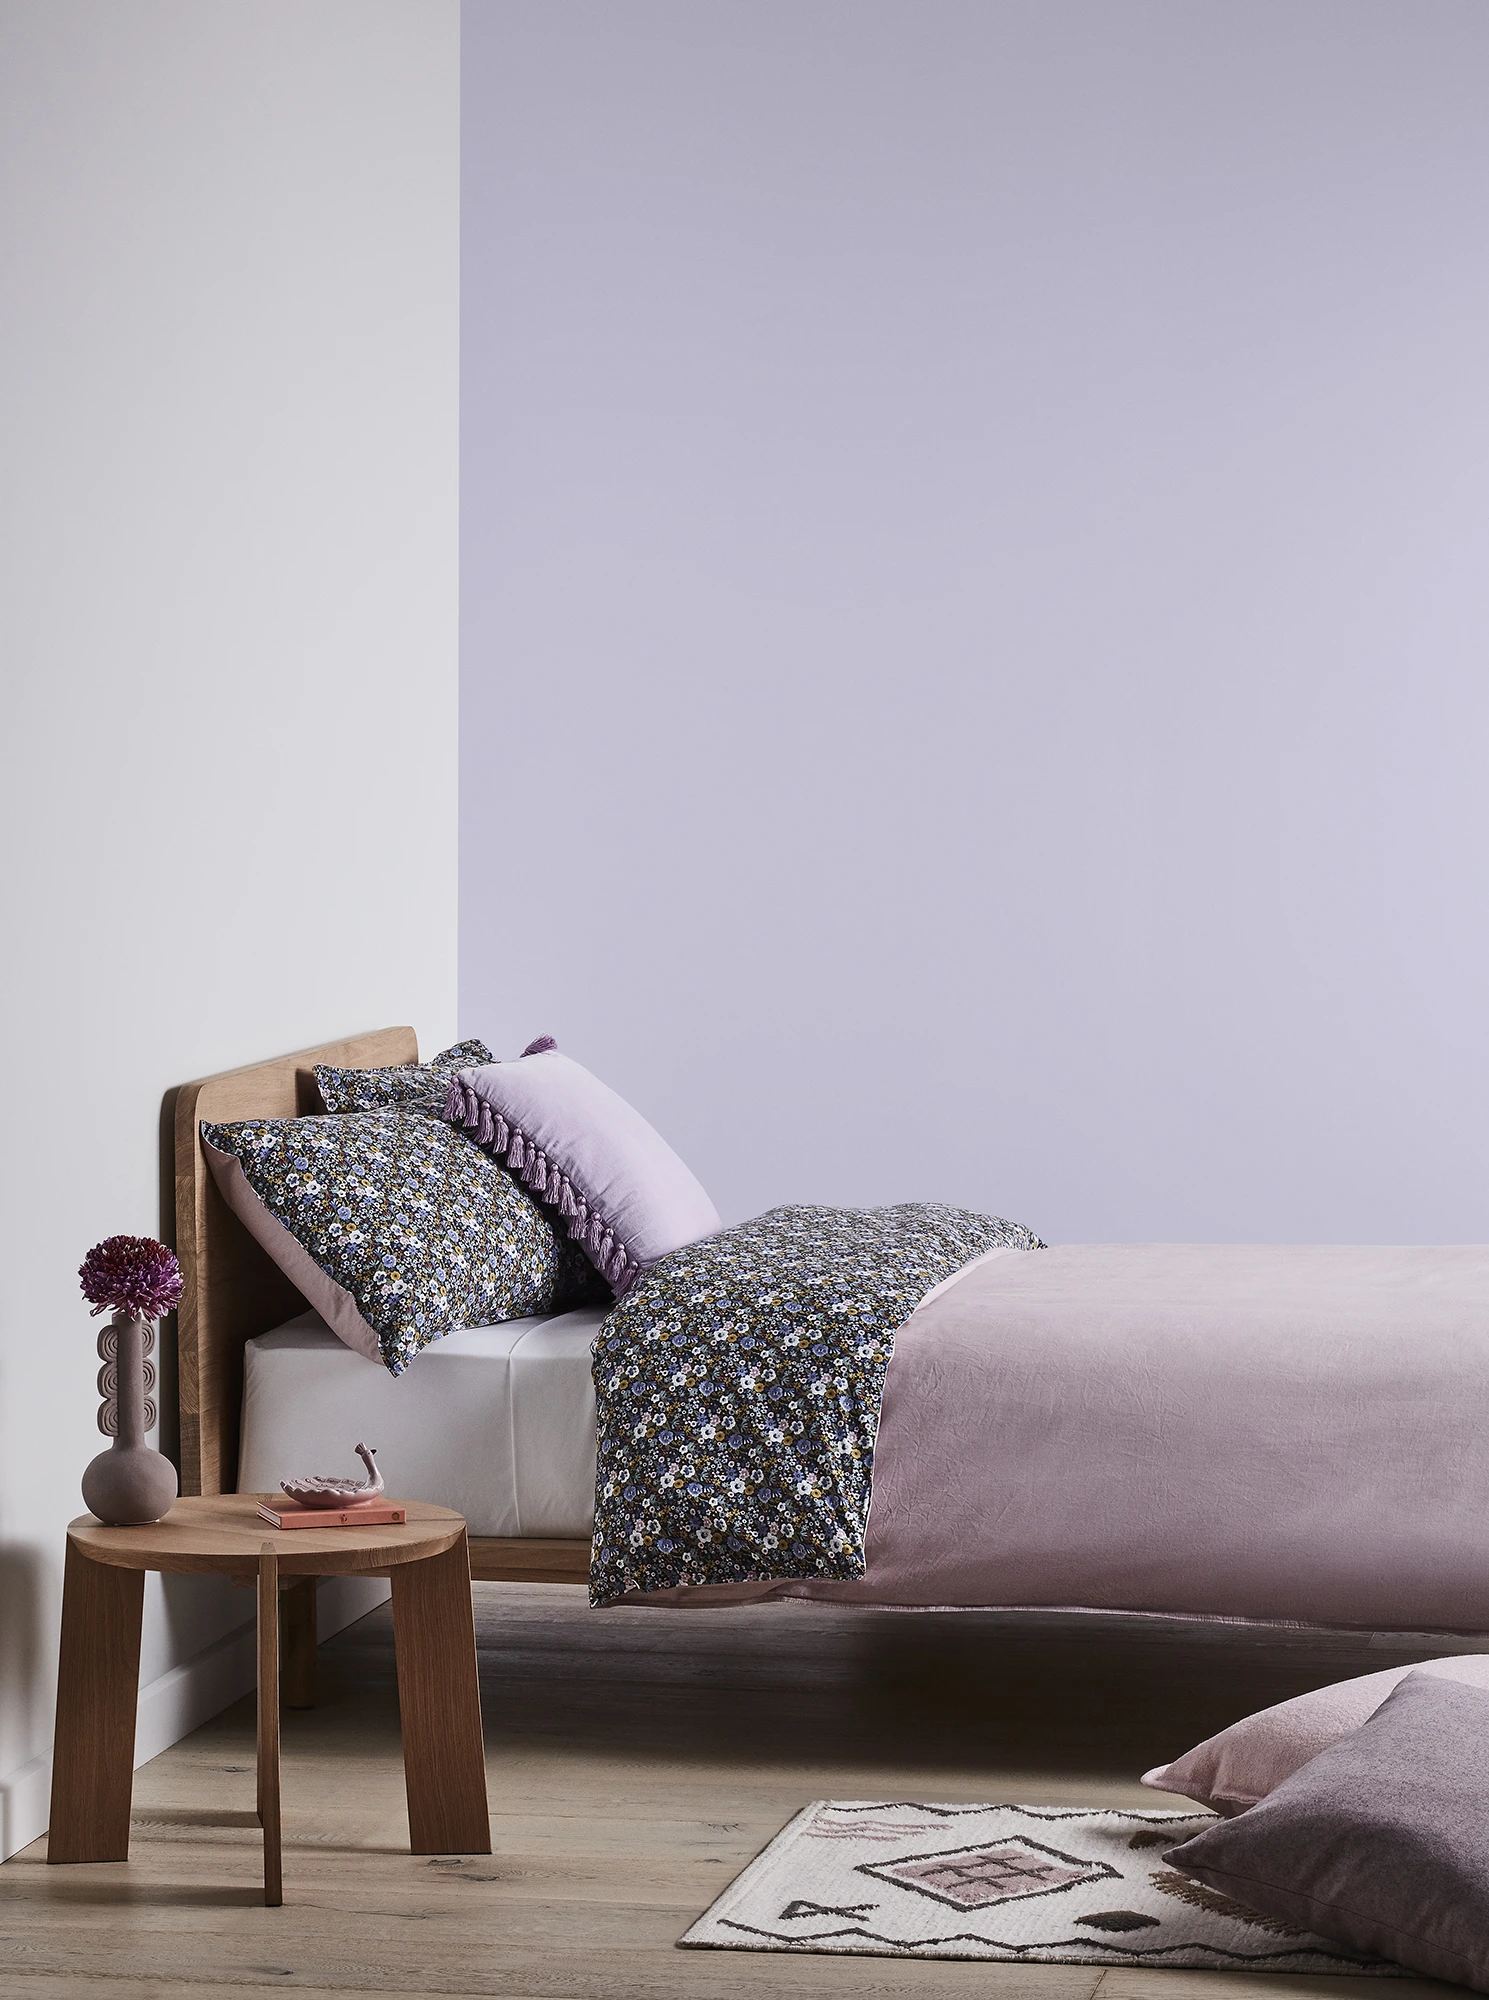 Pink and purple themed bedroom showing bed and side table.